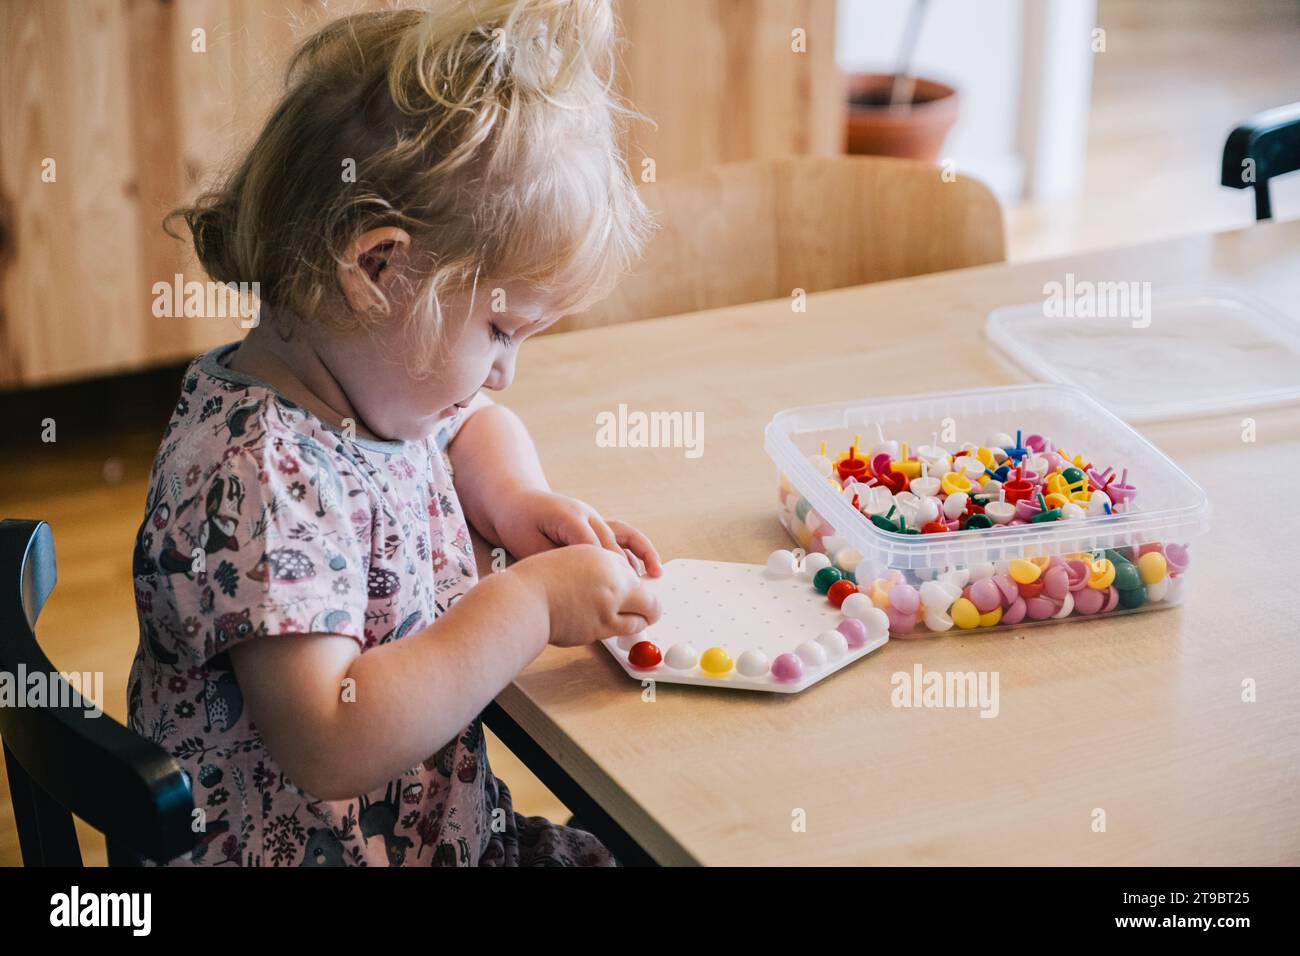 Blond girl playing with pegboard game on table at home Stock Photo